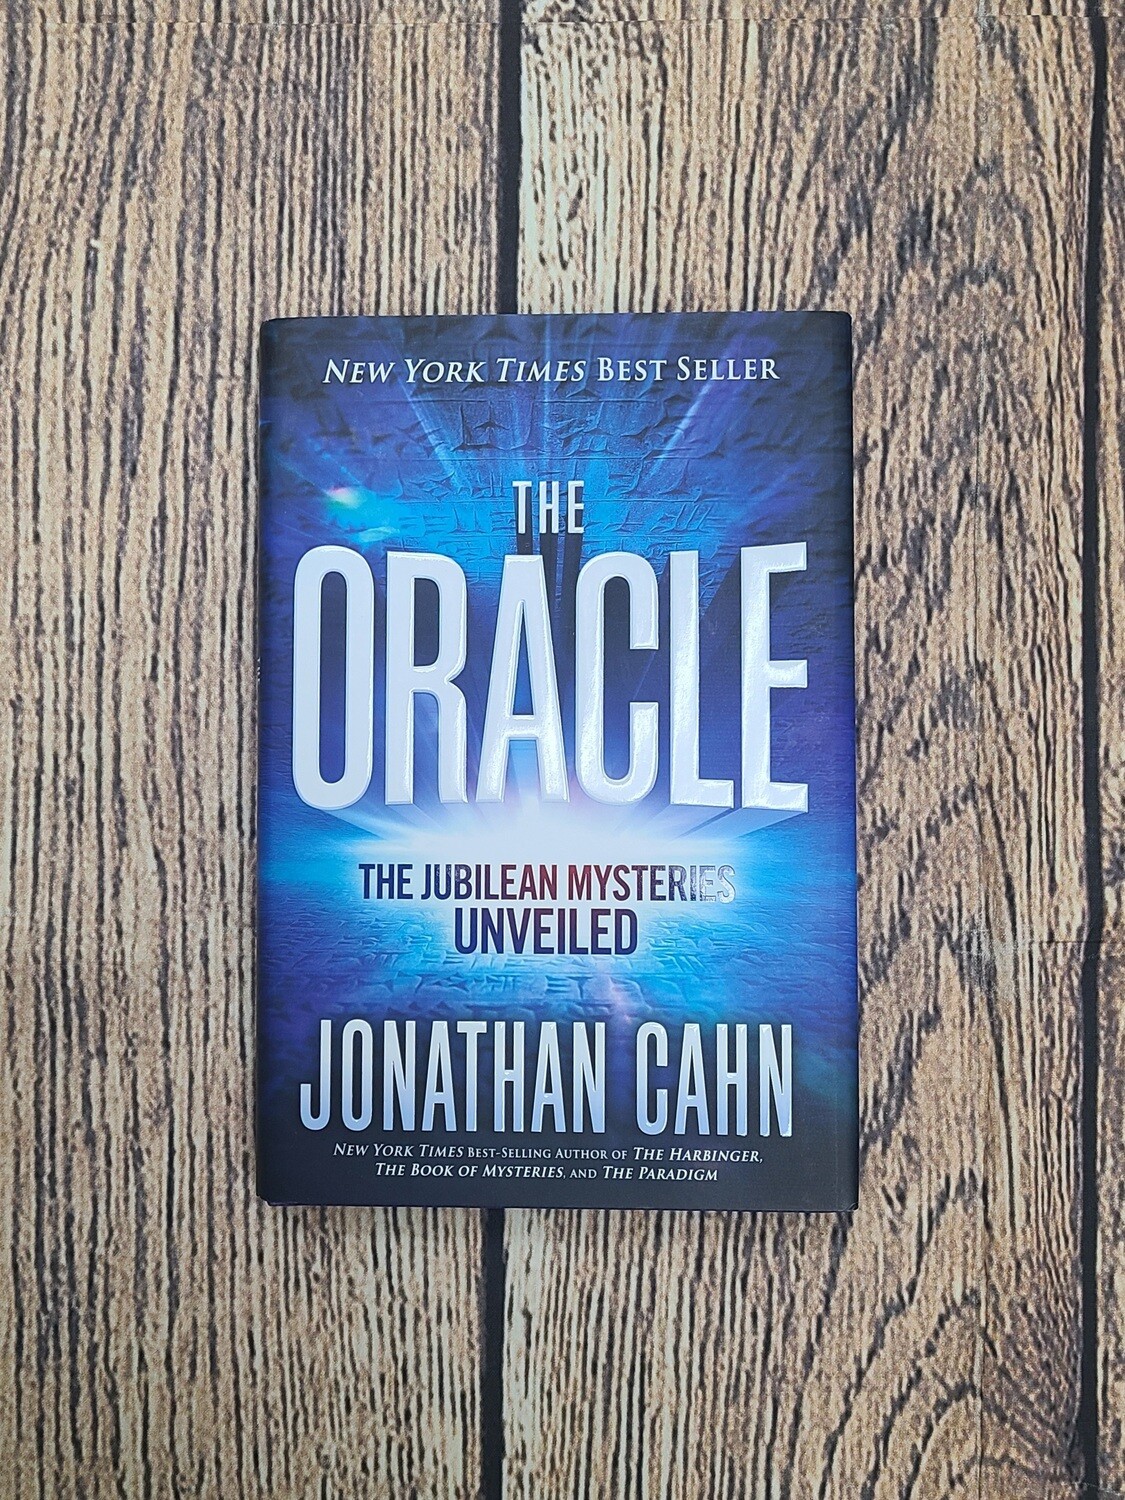 The Oracle: The Jubilean Mysteries Unveiled by Jonathan Cahn